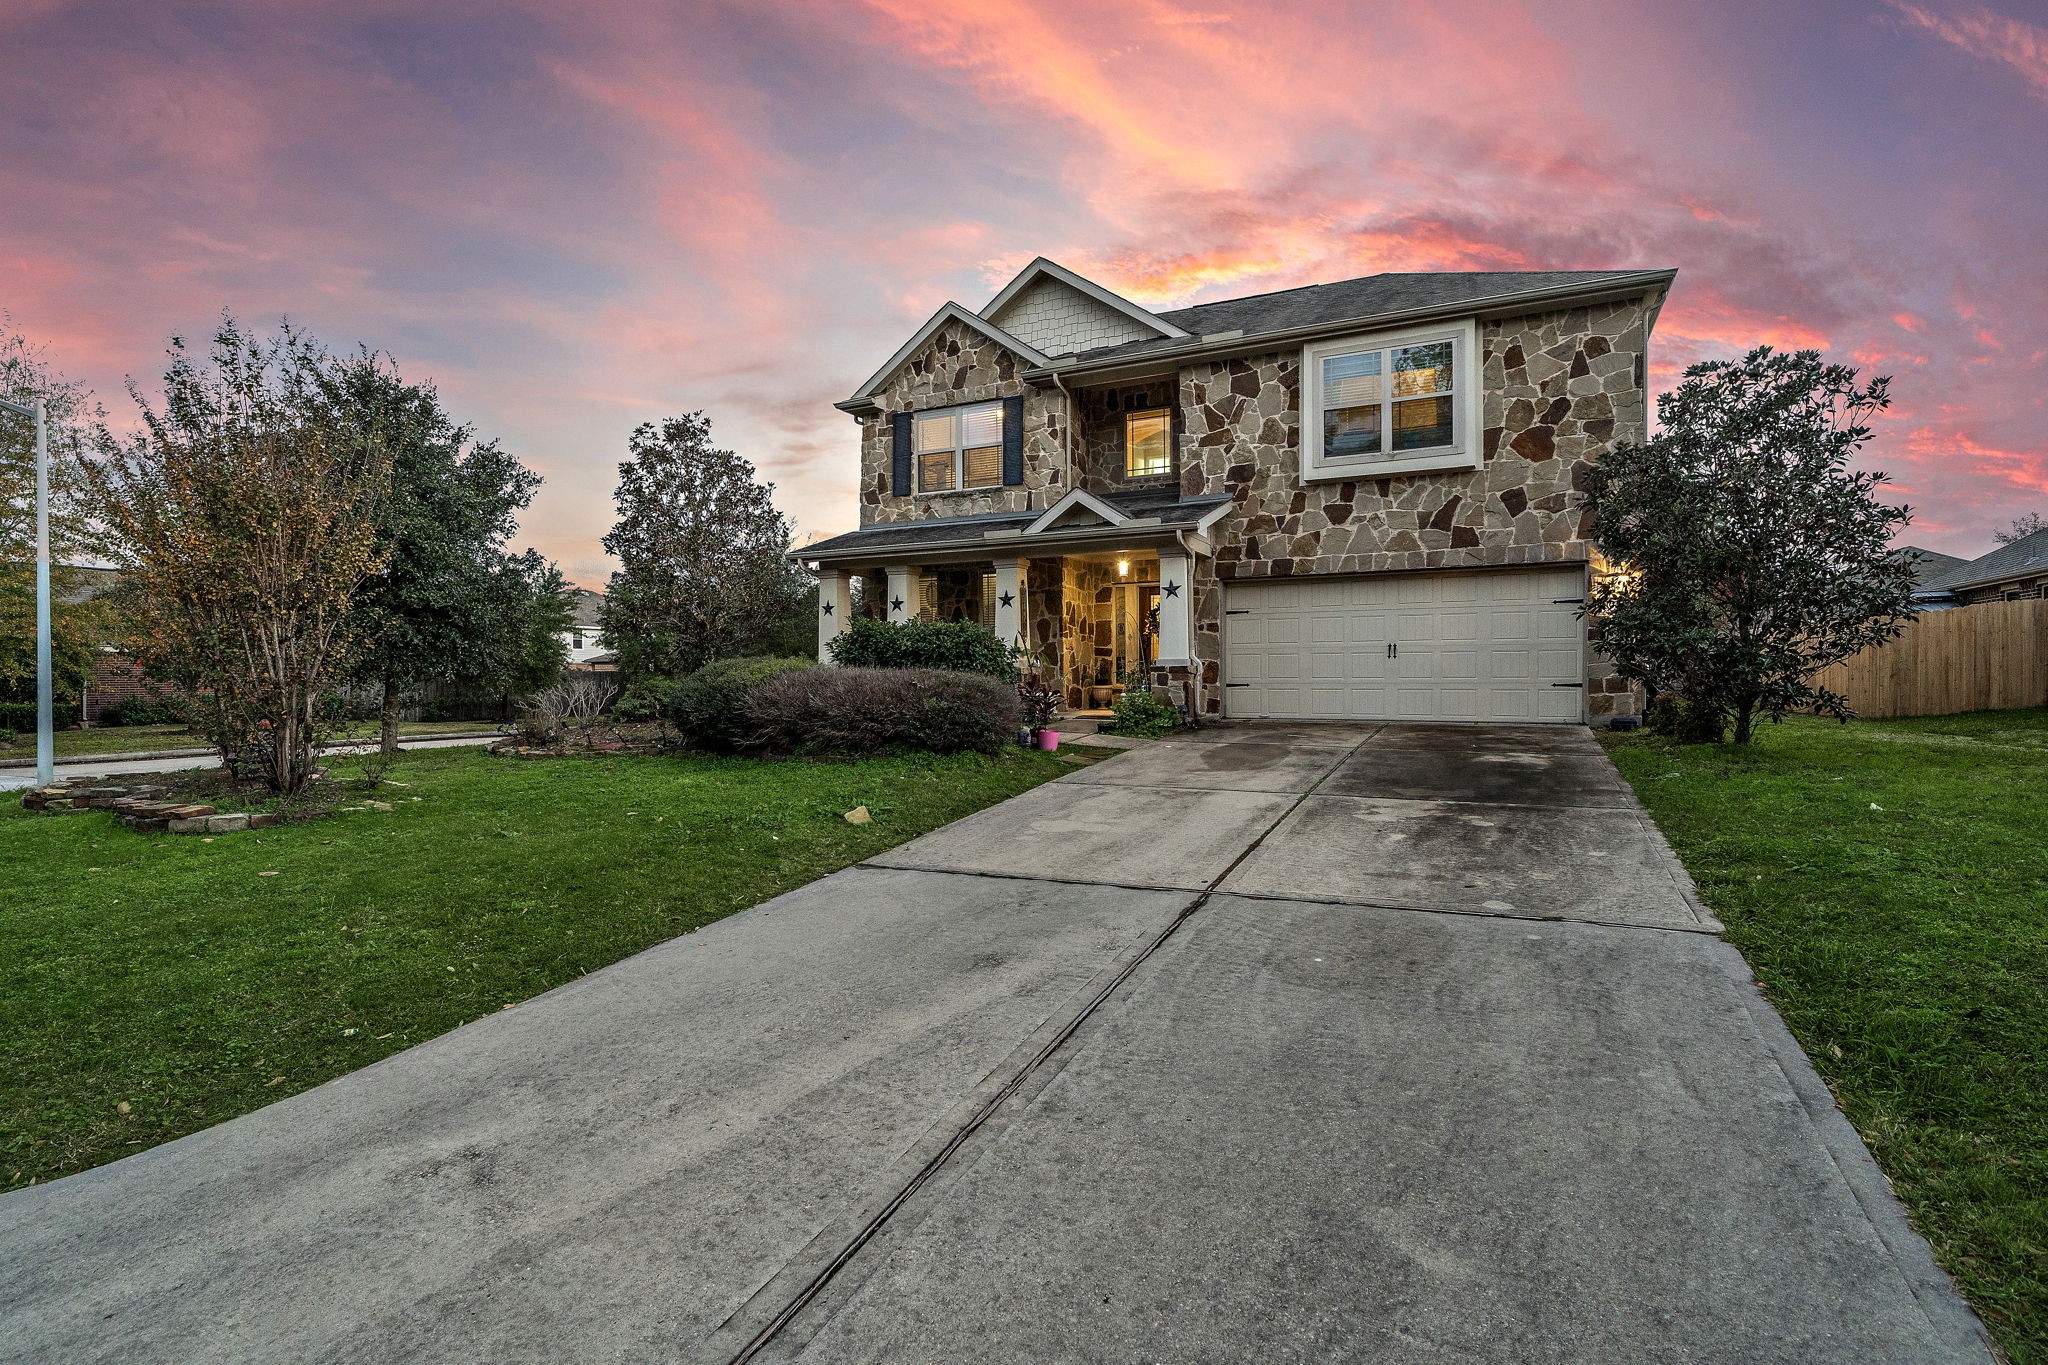 Spacious two-story home with stone accents, offering sunset views in a serene neighborhood.